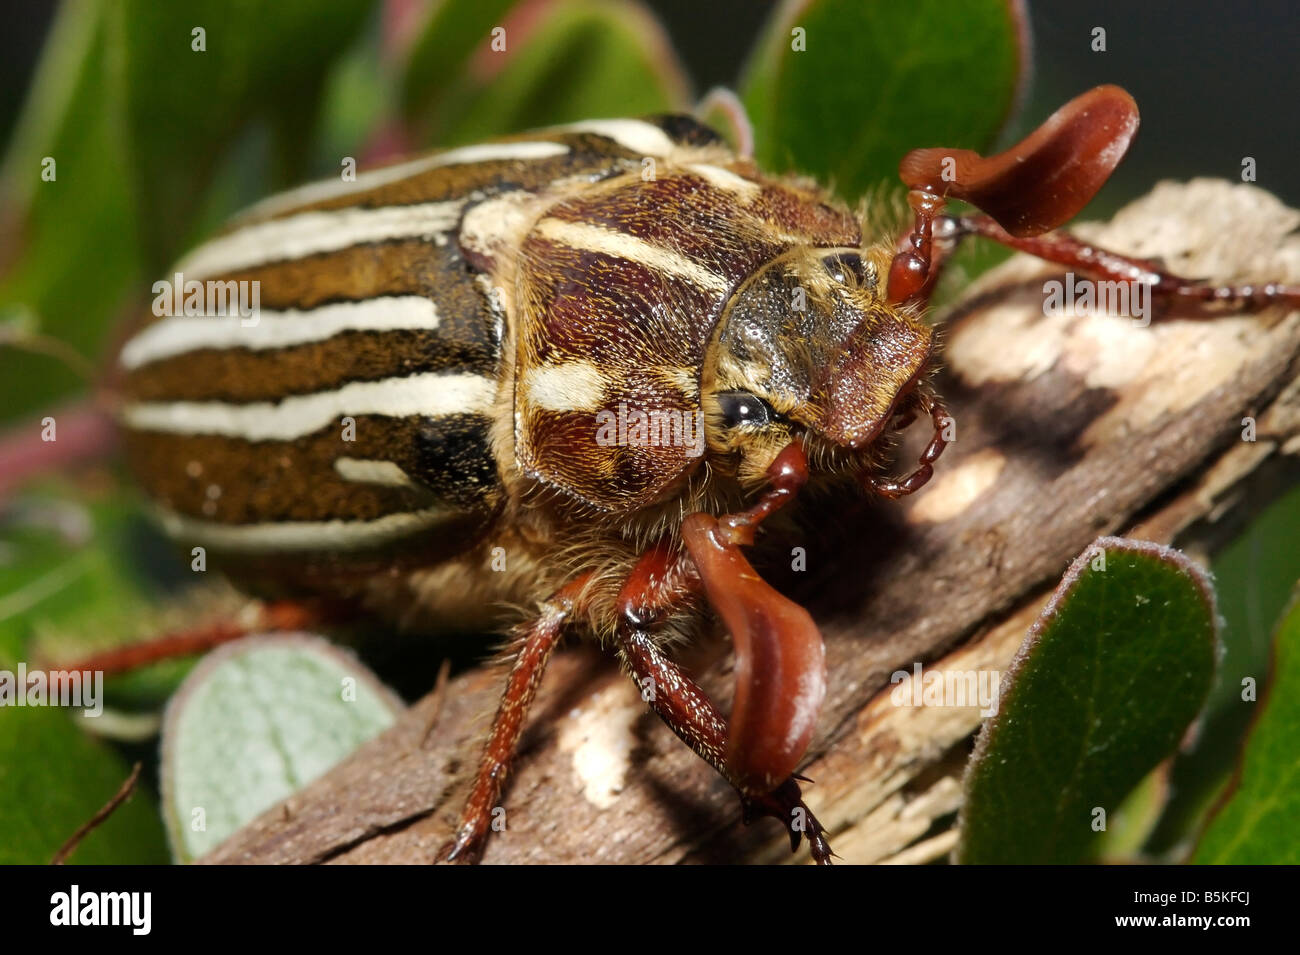 A ten-lined june beetle (Polyphylla decemlineata) found on Vancouver Island in Comox, British Columbia, Canada. Stock Photo